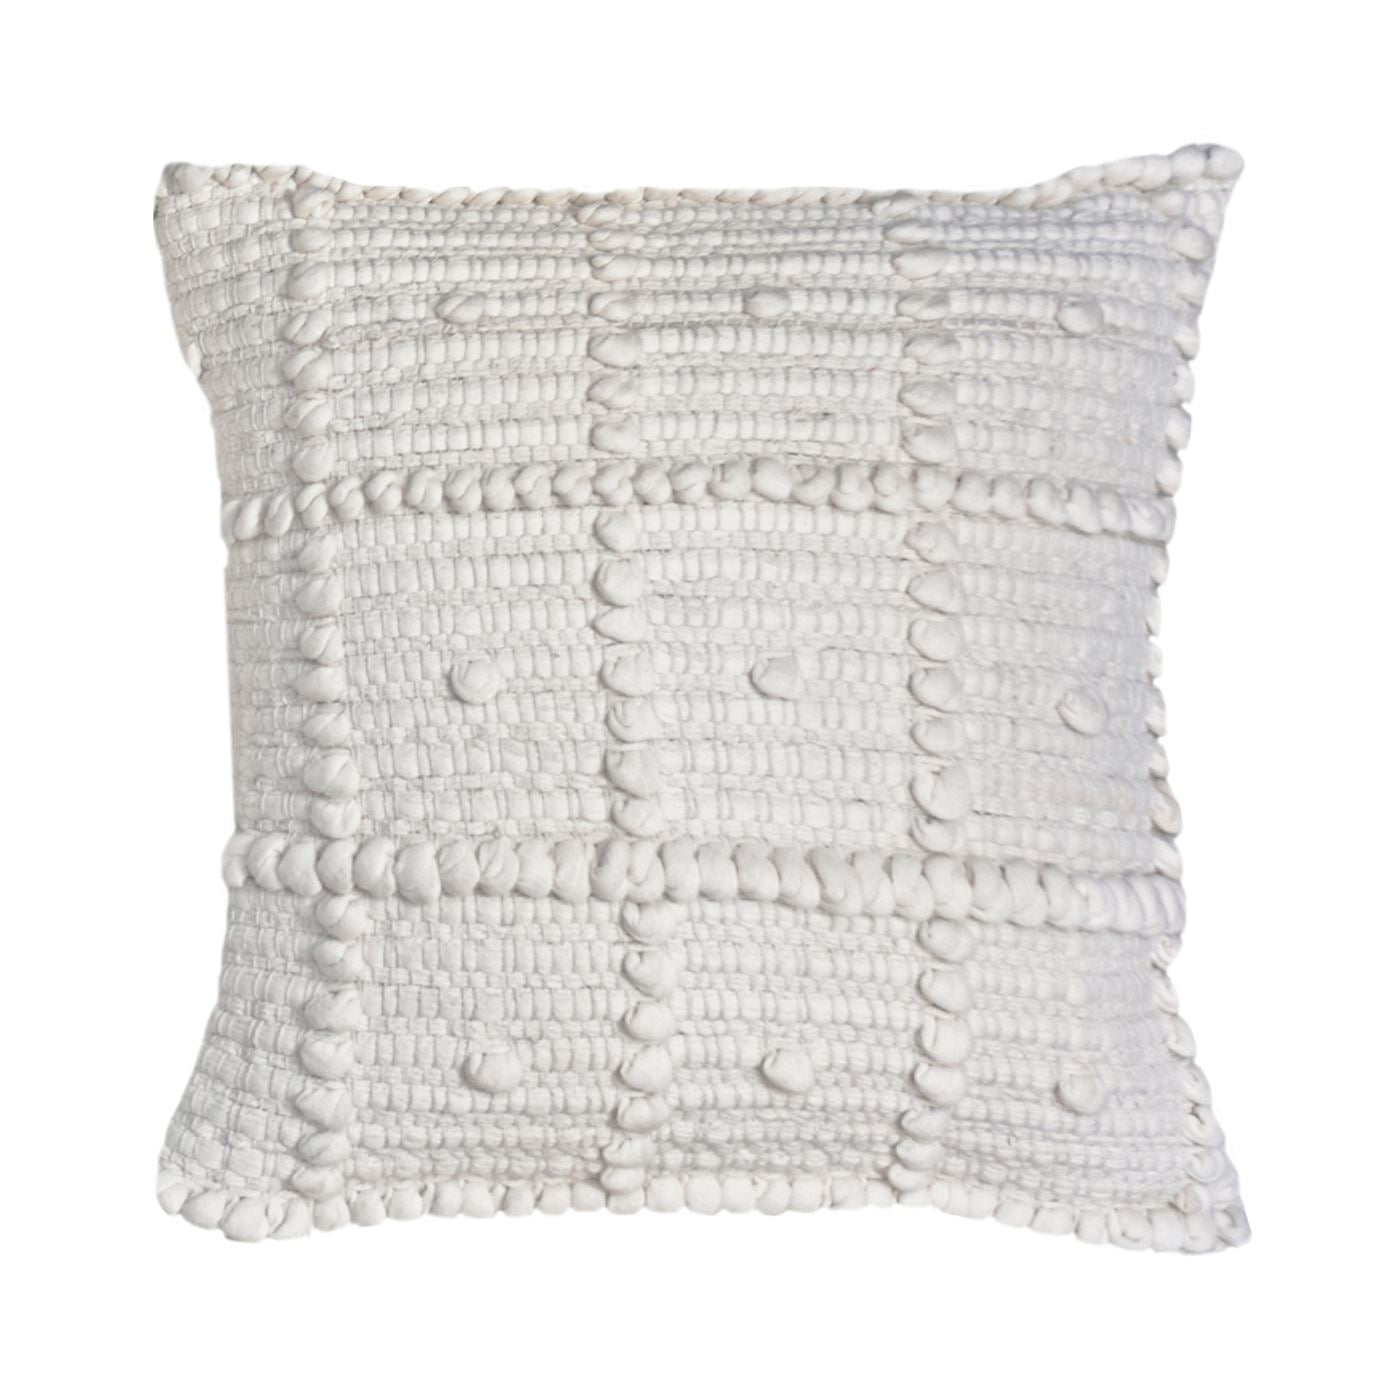 Arrino Pillow, Cotton, Natural White, Pitloom, All Loop